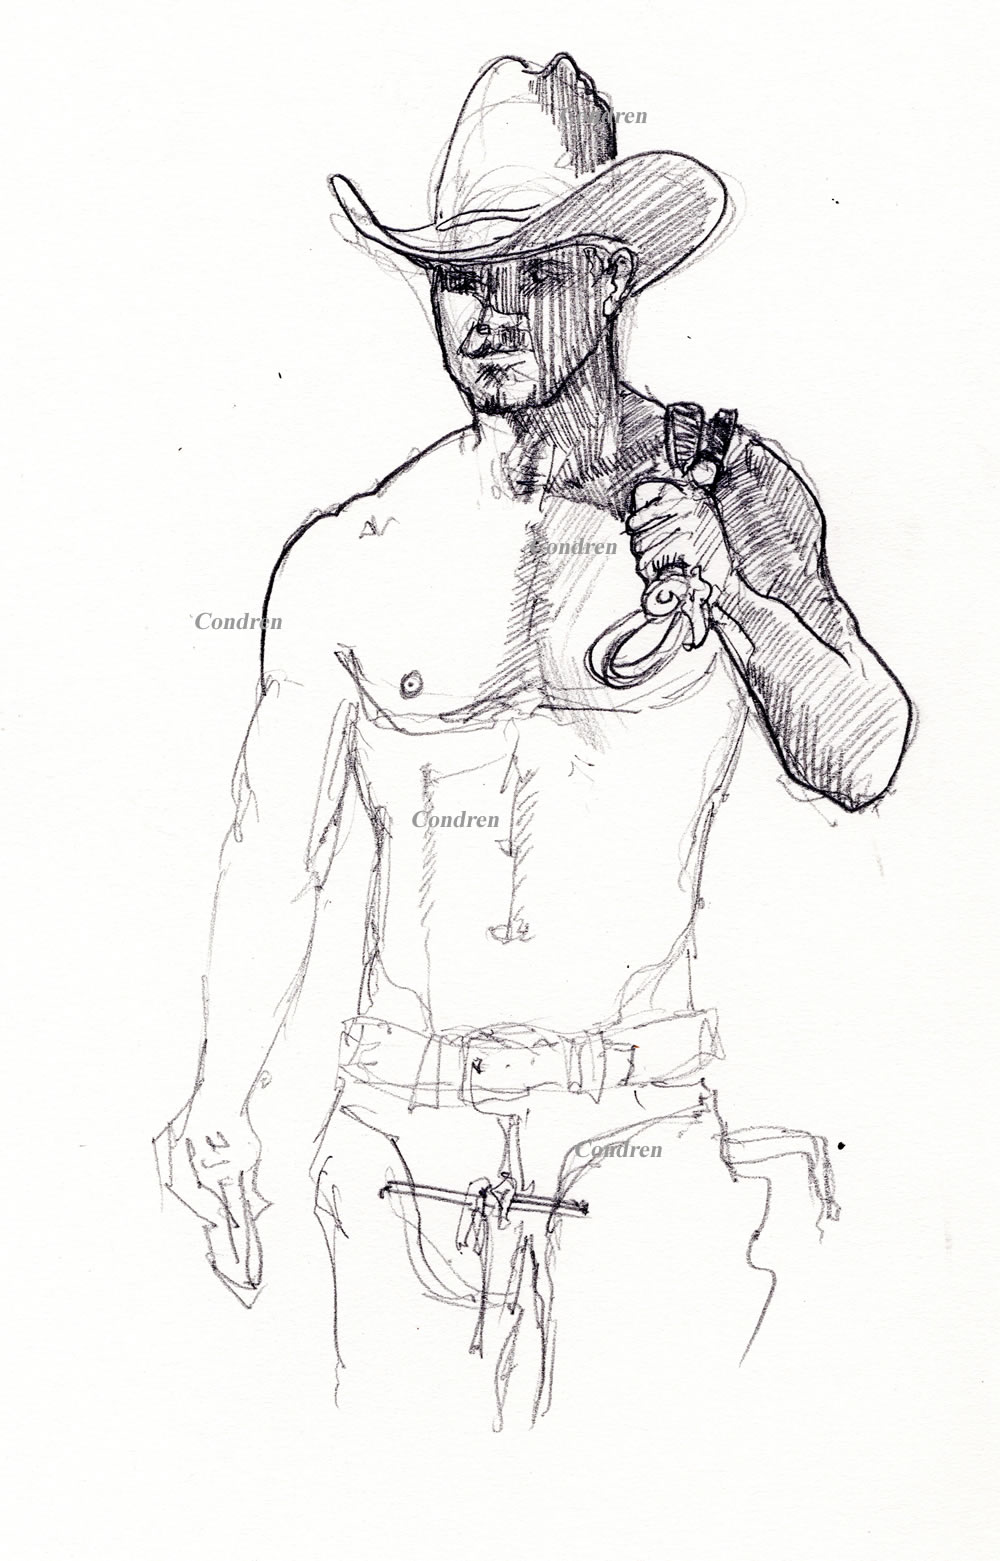 Pencil drawing of a gay cowboy with 10-gallon hat by artist Stephen F. Condren.